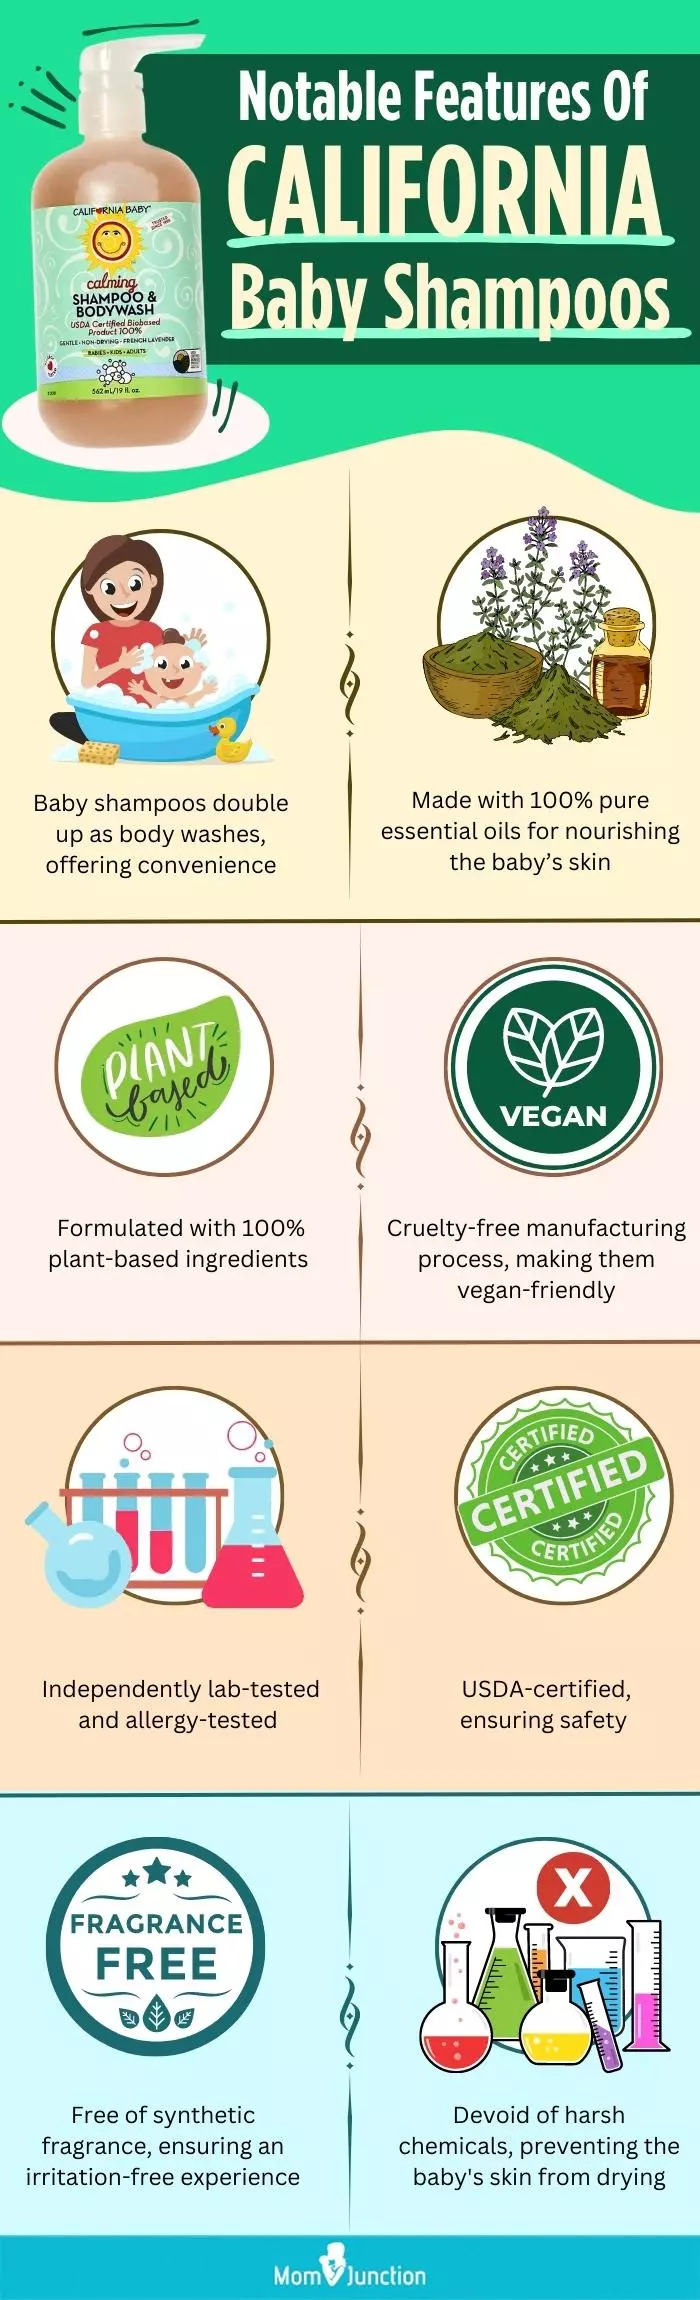 Notable Features Of California Baby Shampoos (infographic)